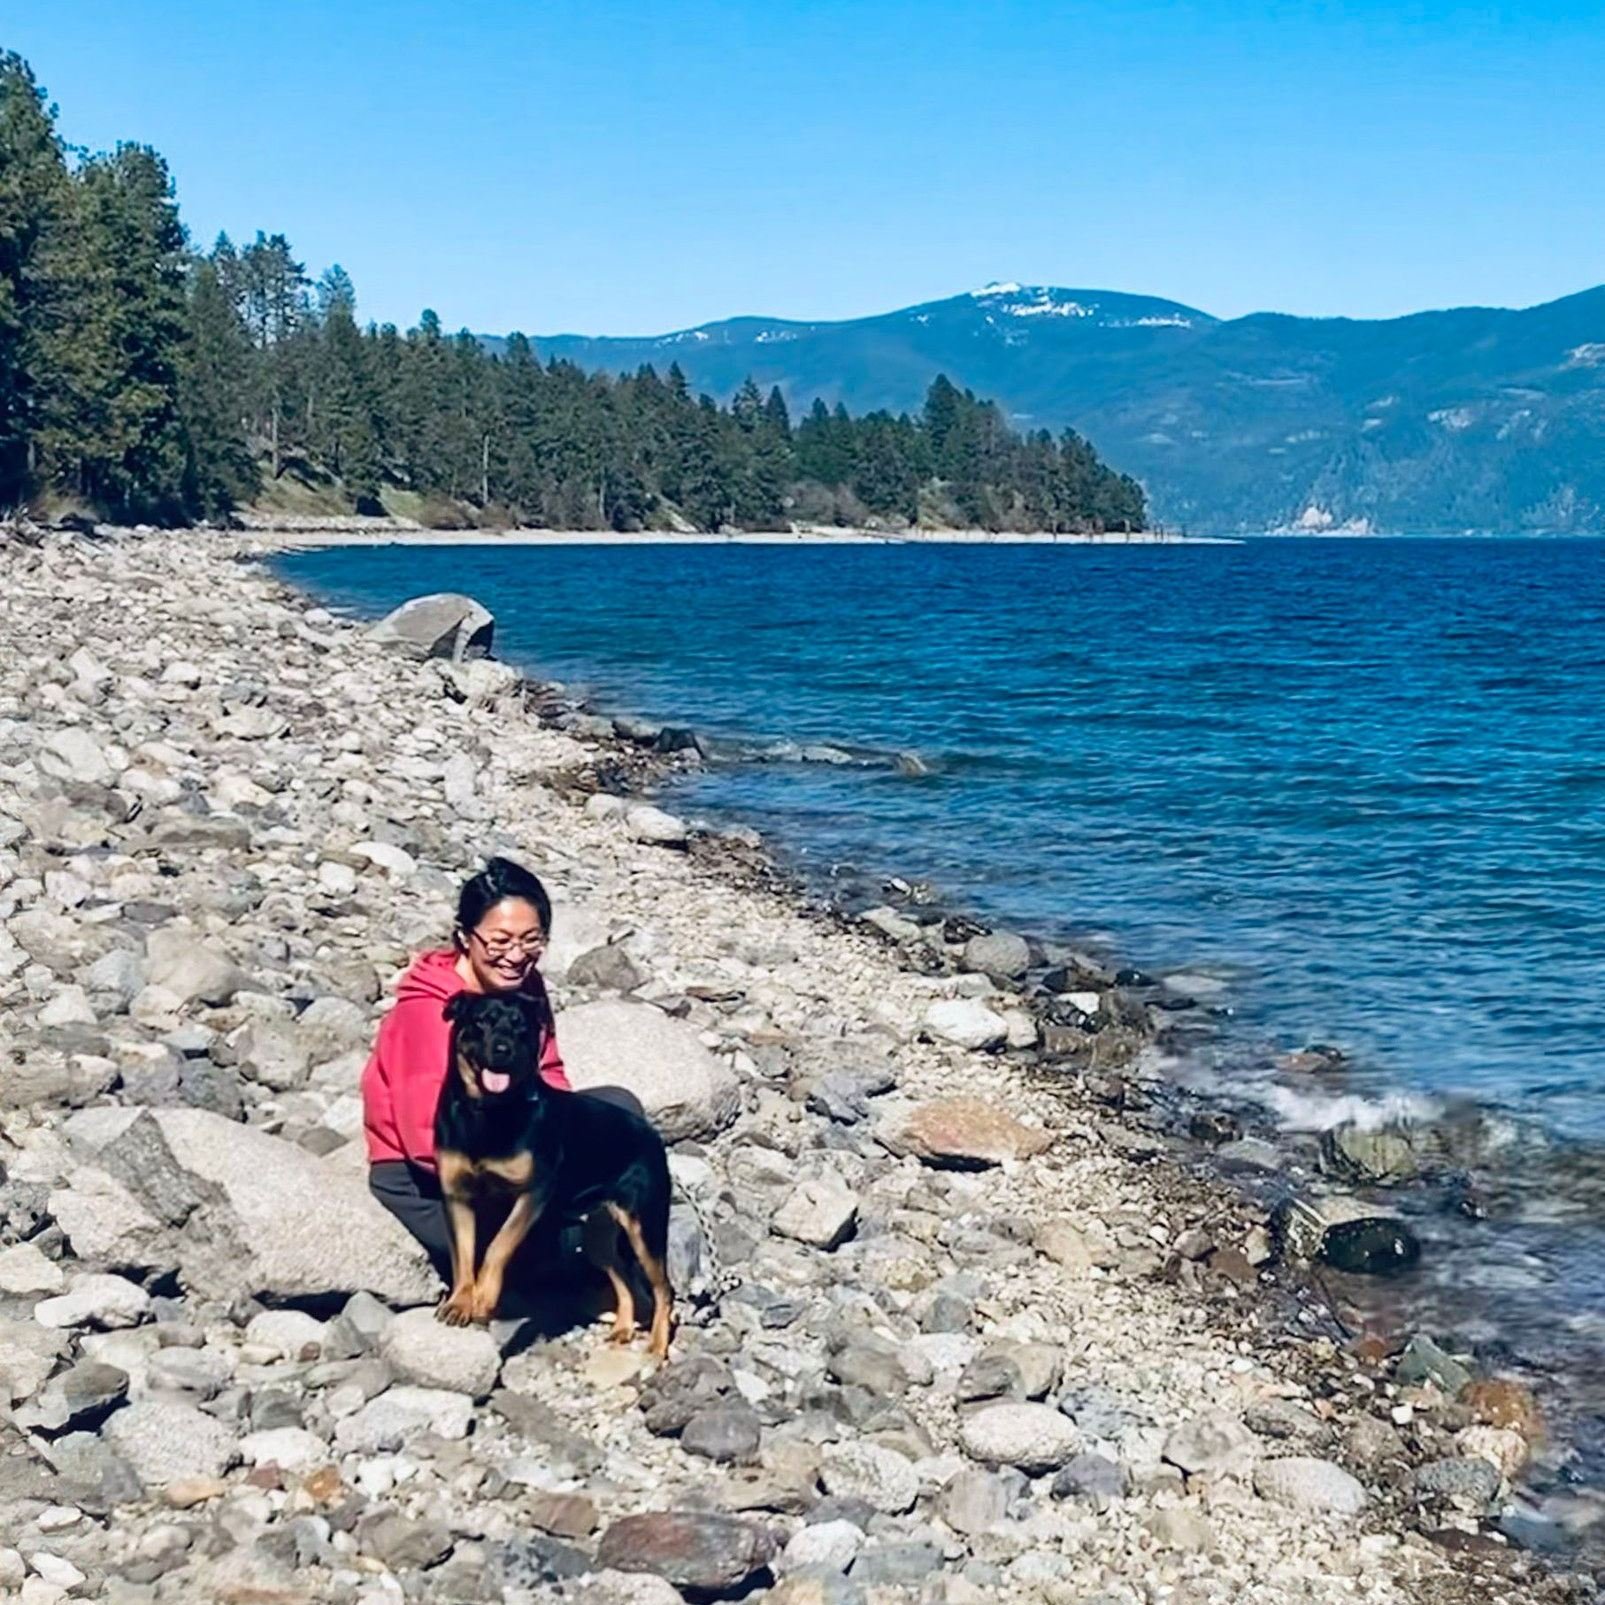 Zar Zar had an amazing weekend adventure in Idaho with their BMHS foster, Dr. Kitty Nguyen! They enjoyed hiking, exploring nature, and even made a new furry friend with a similar personality. It's a big step that they both tolerated each other so wel